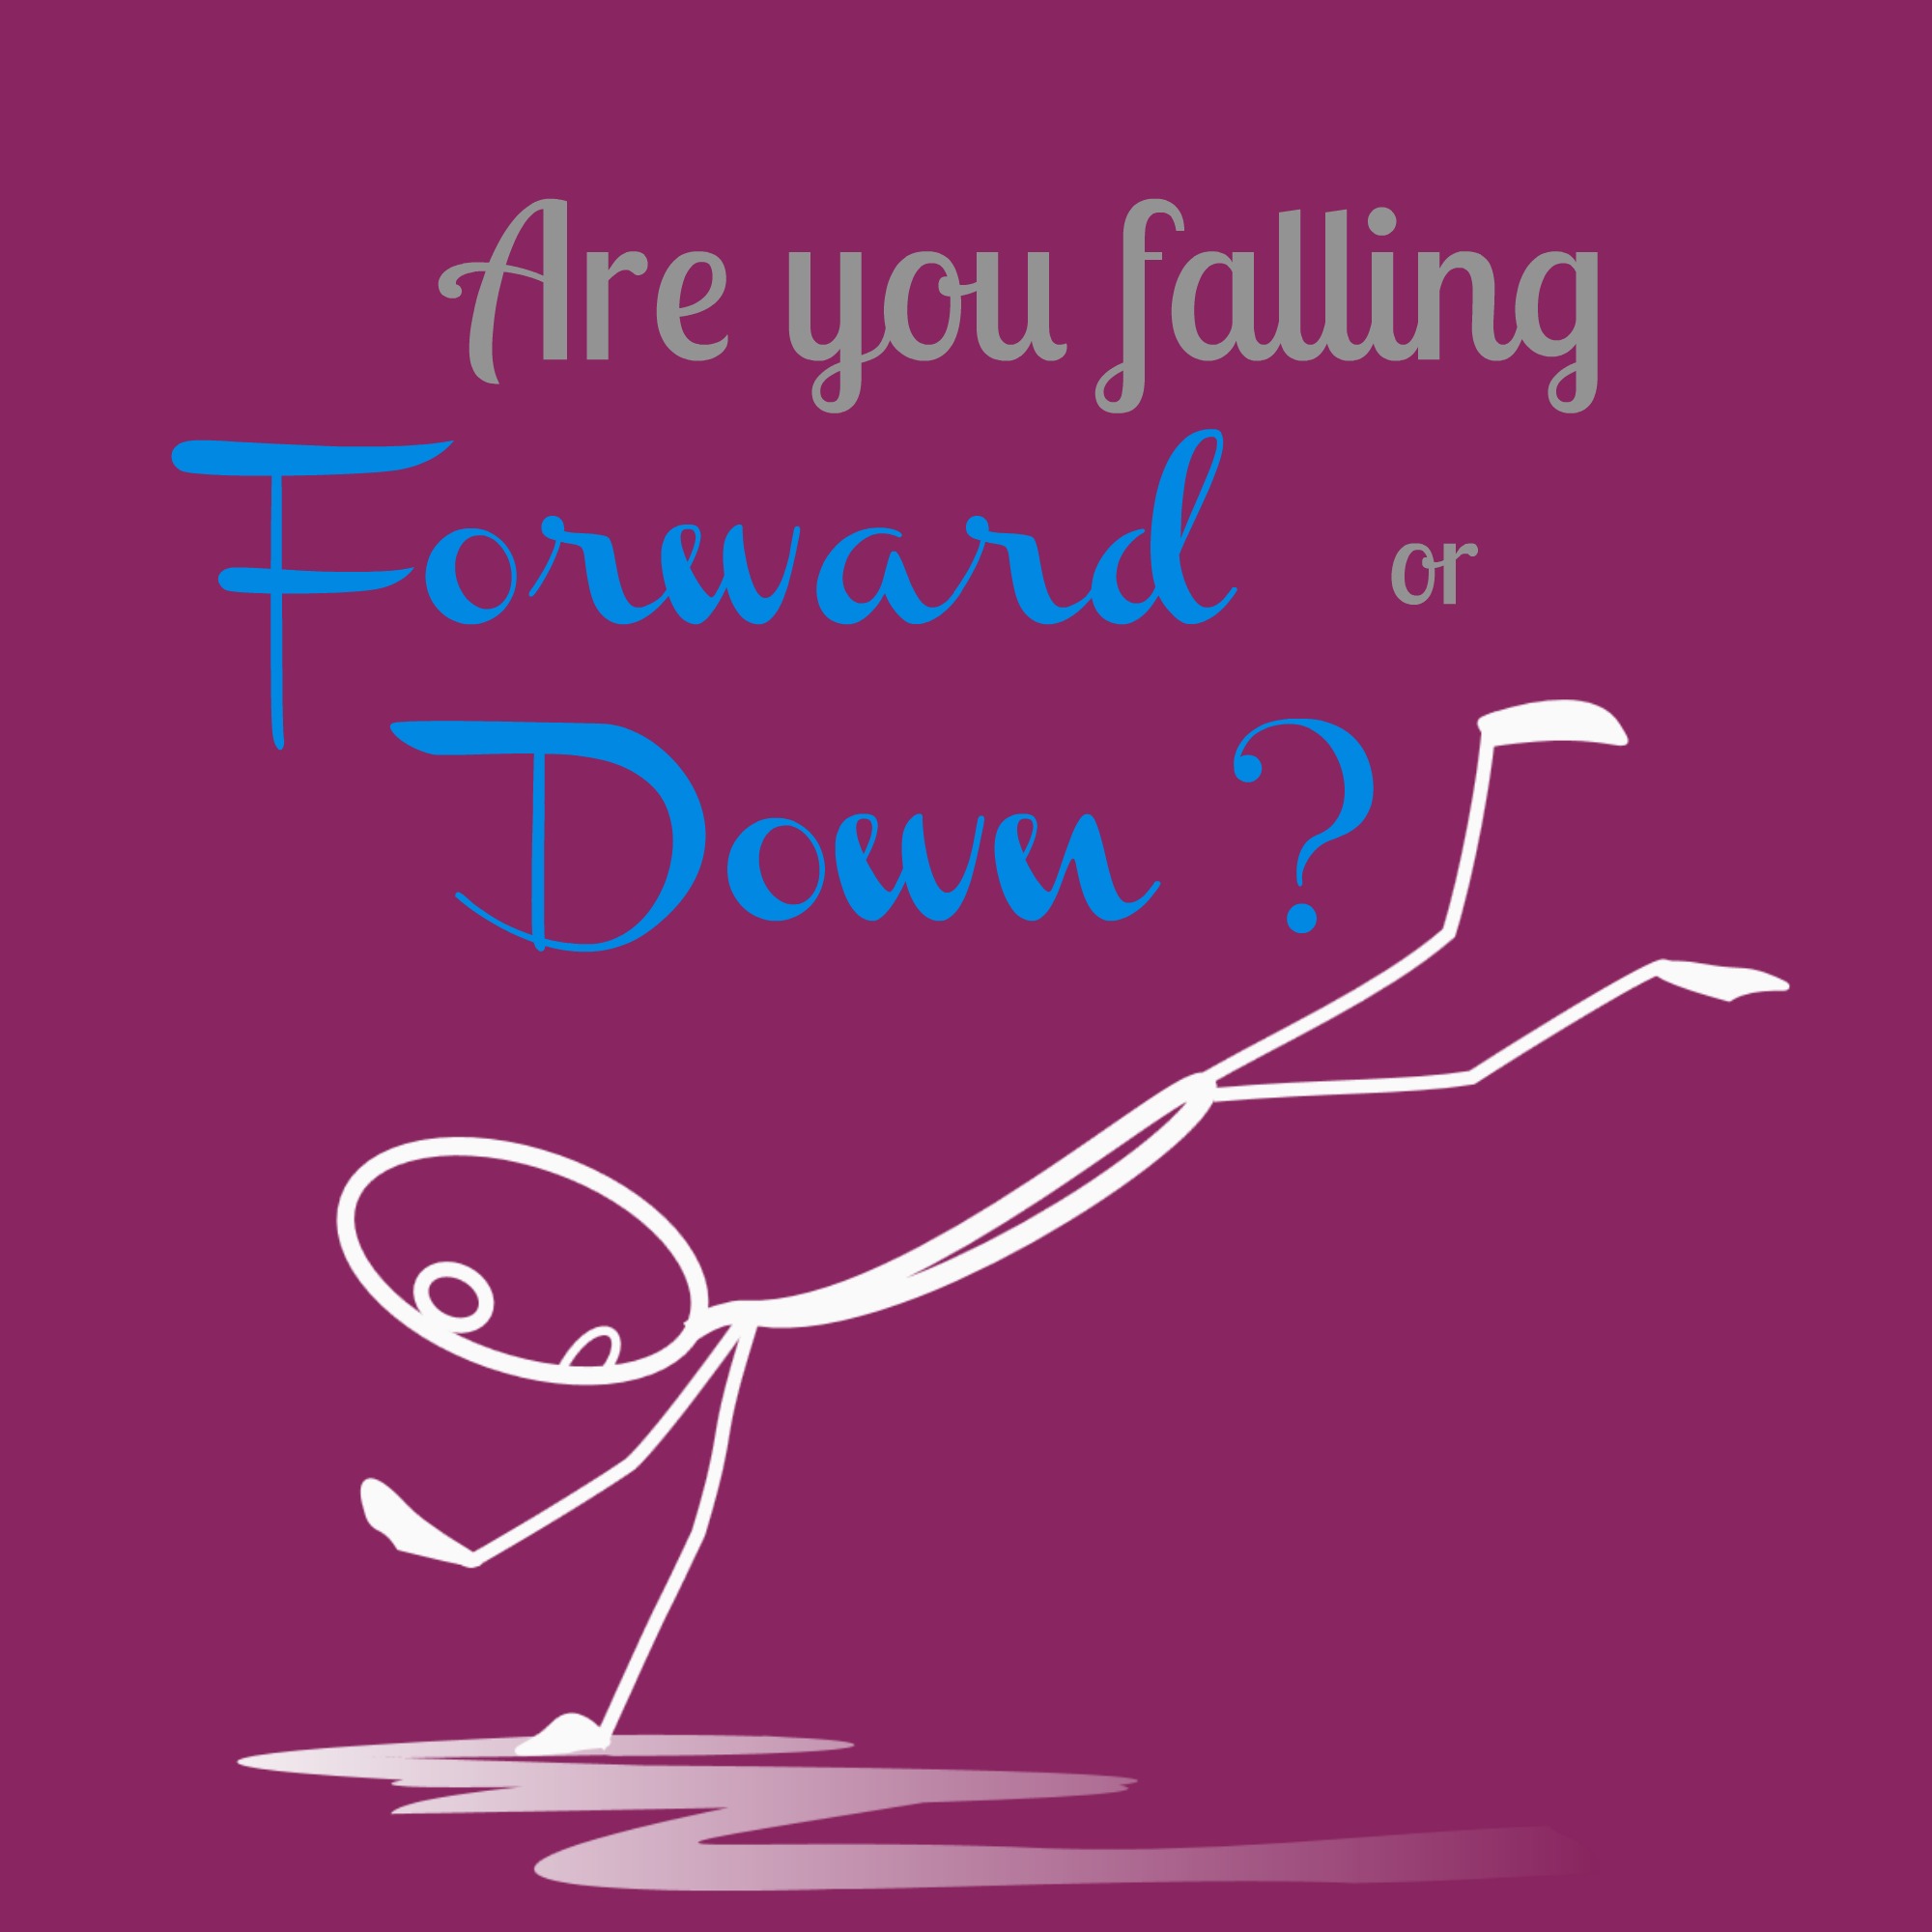 Are You Falling Down or Falling Forward?